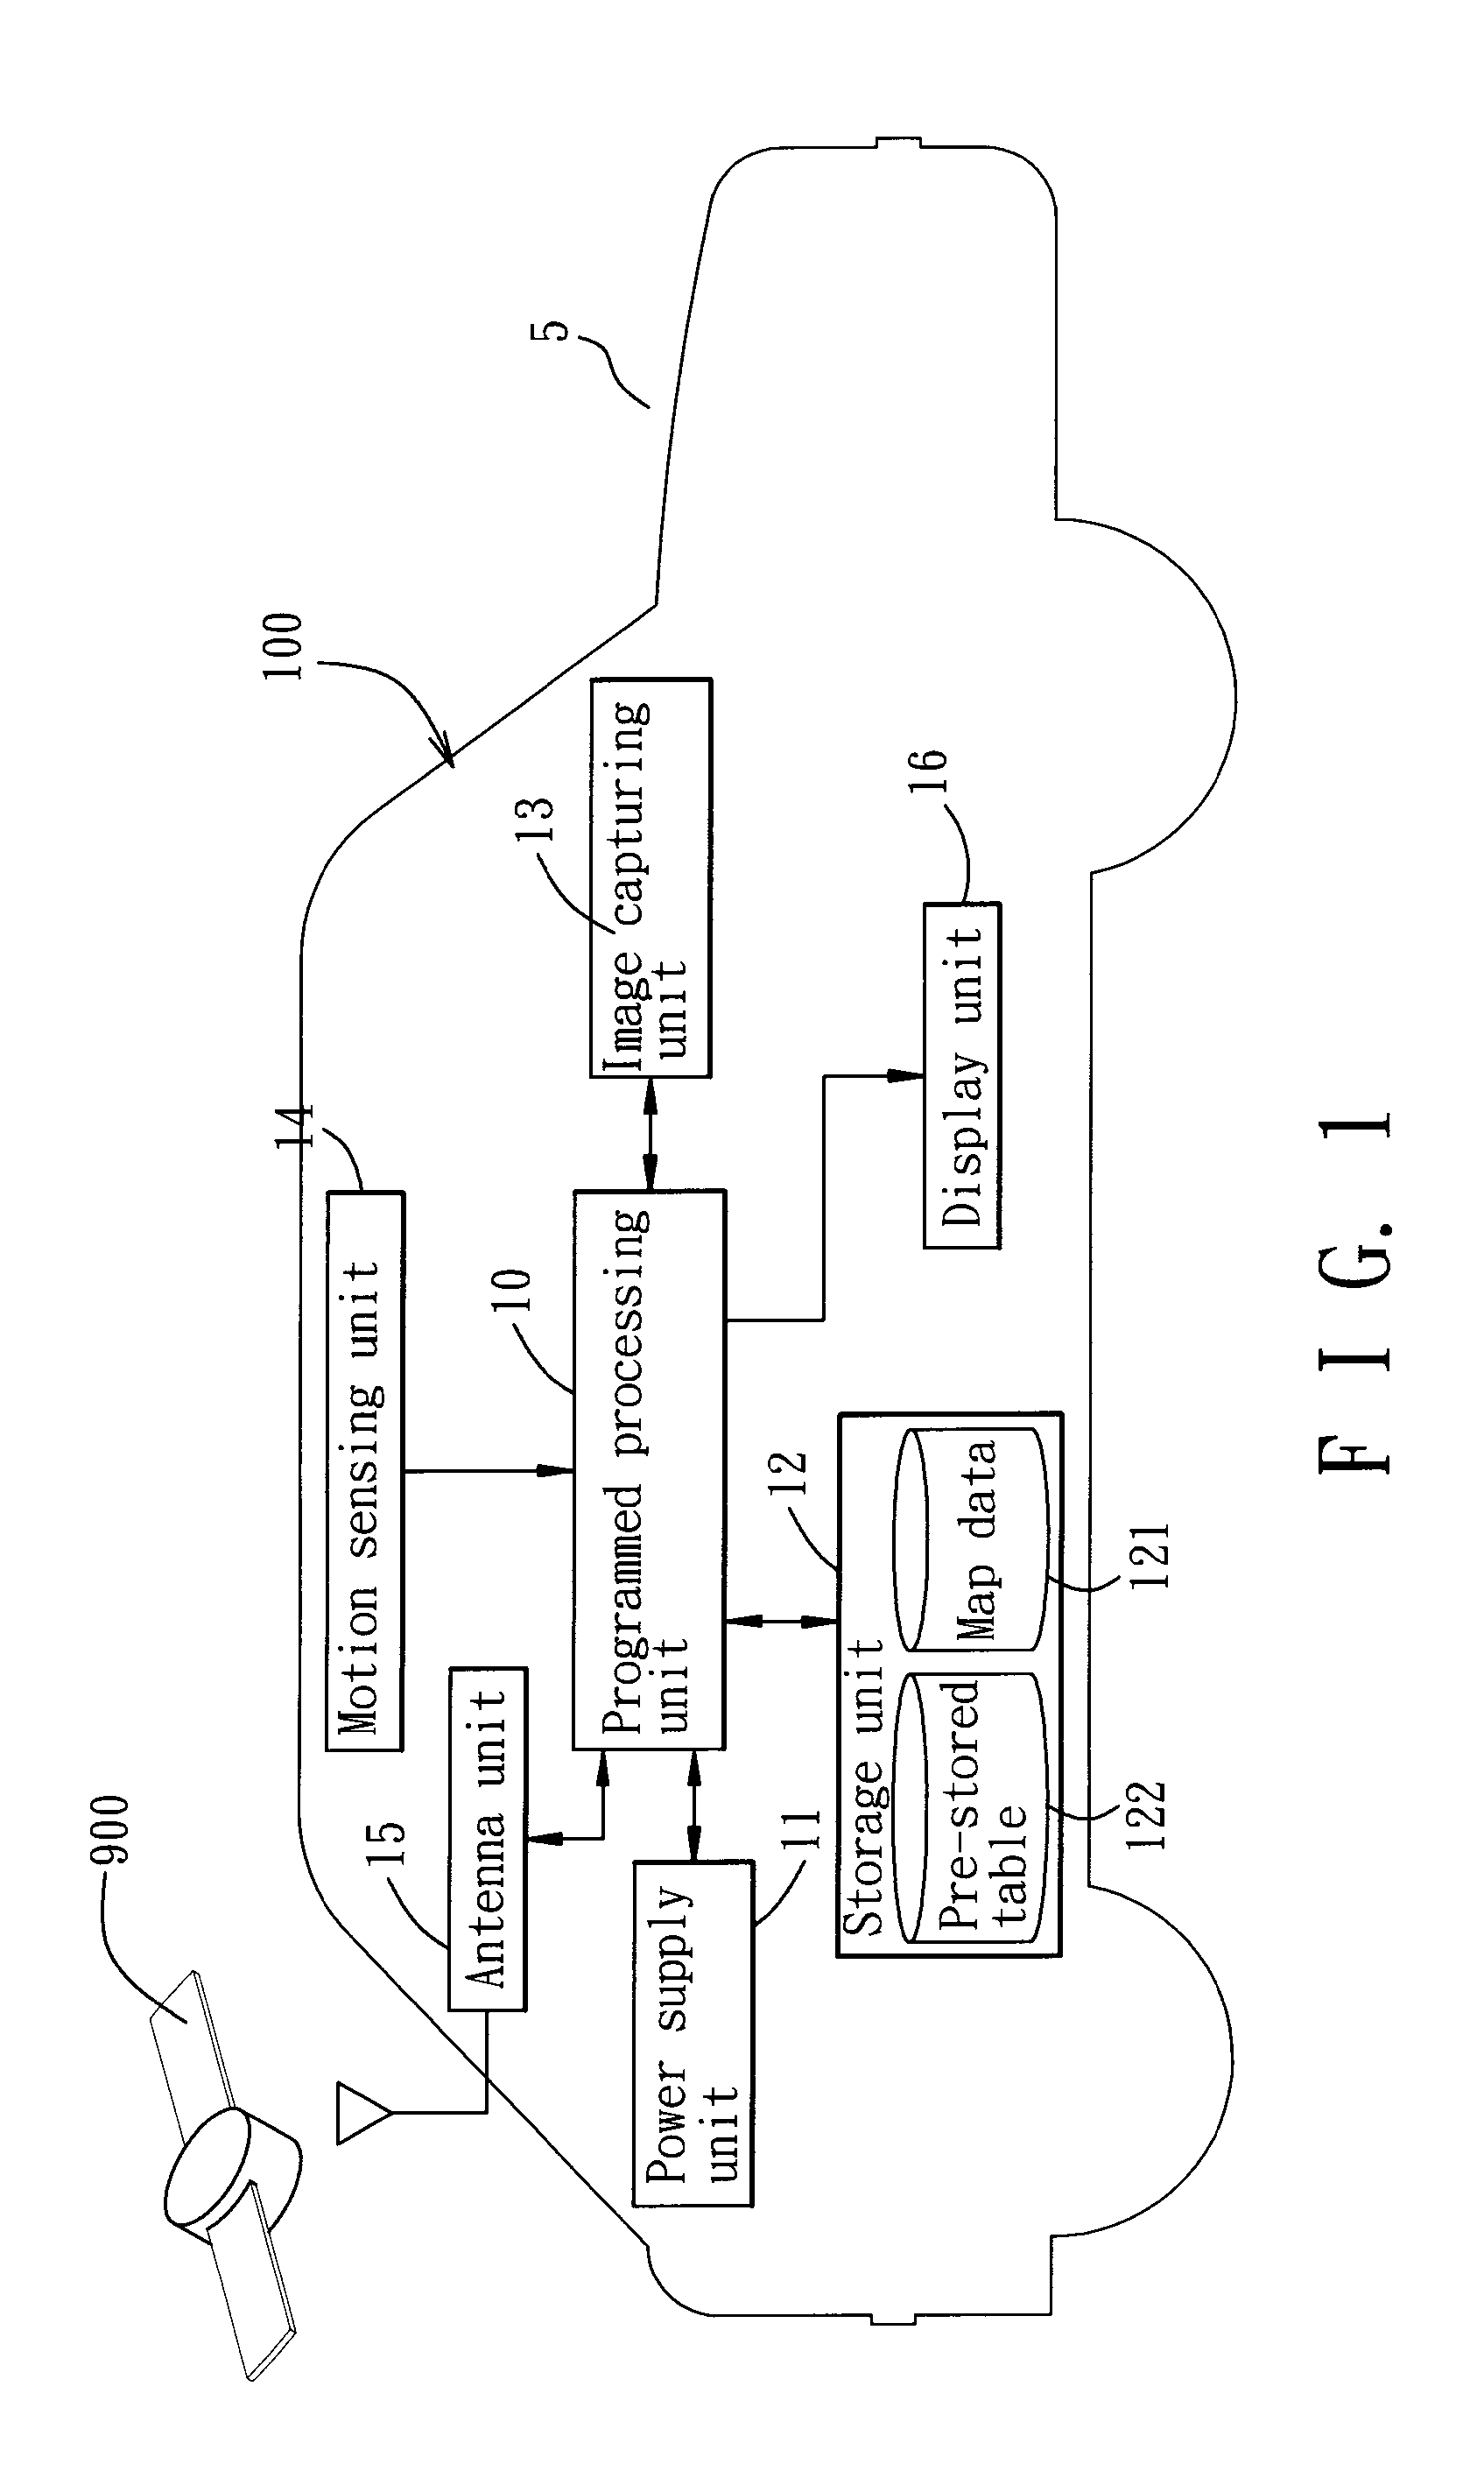 Method of recording traffic images and a drive recorder system